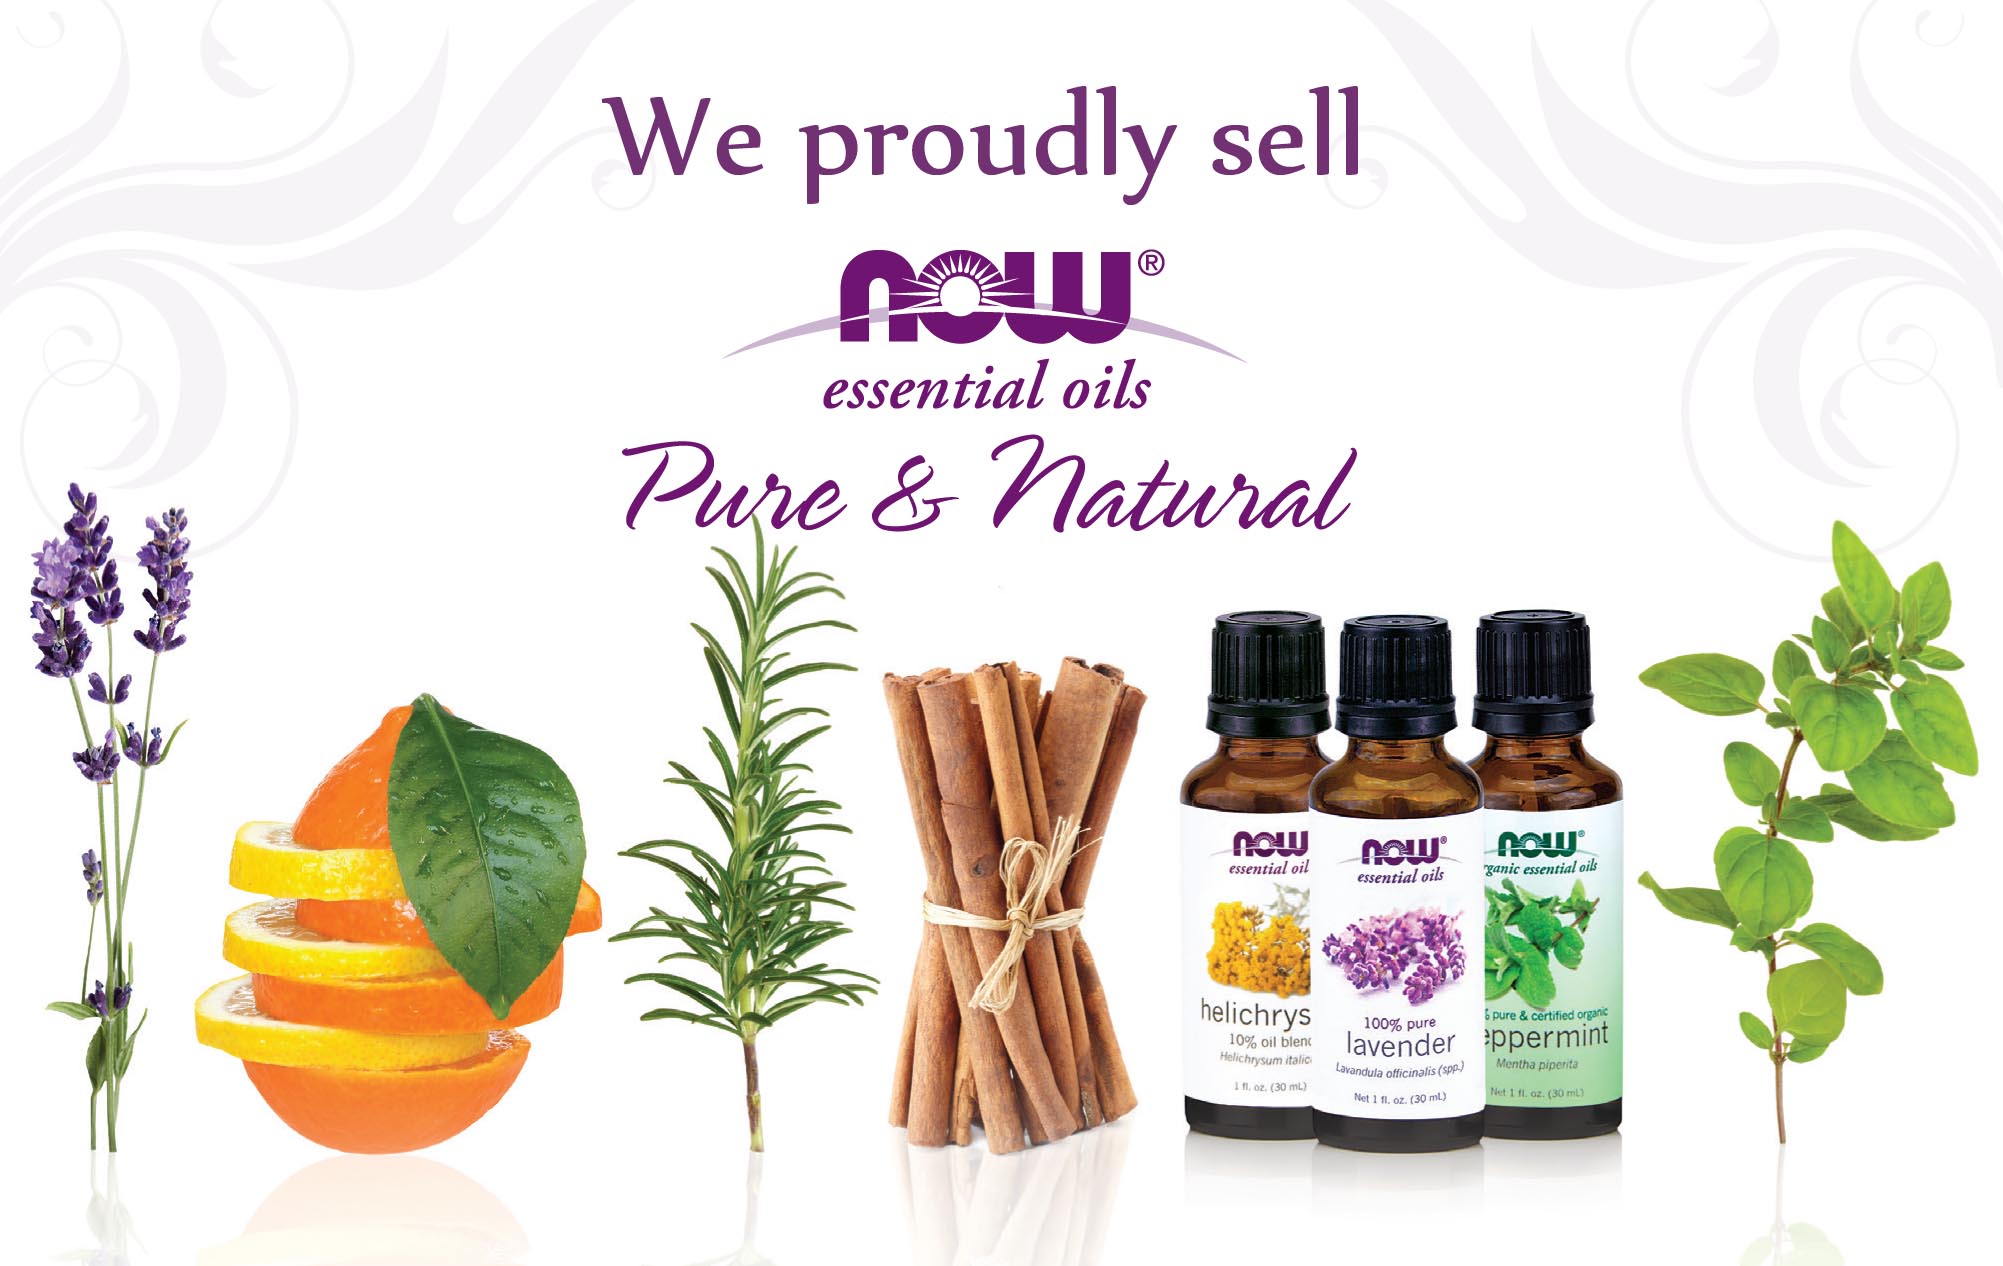 Food Grade Essential Oils, Learn More